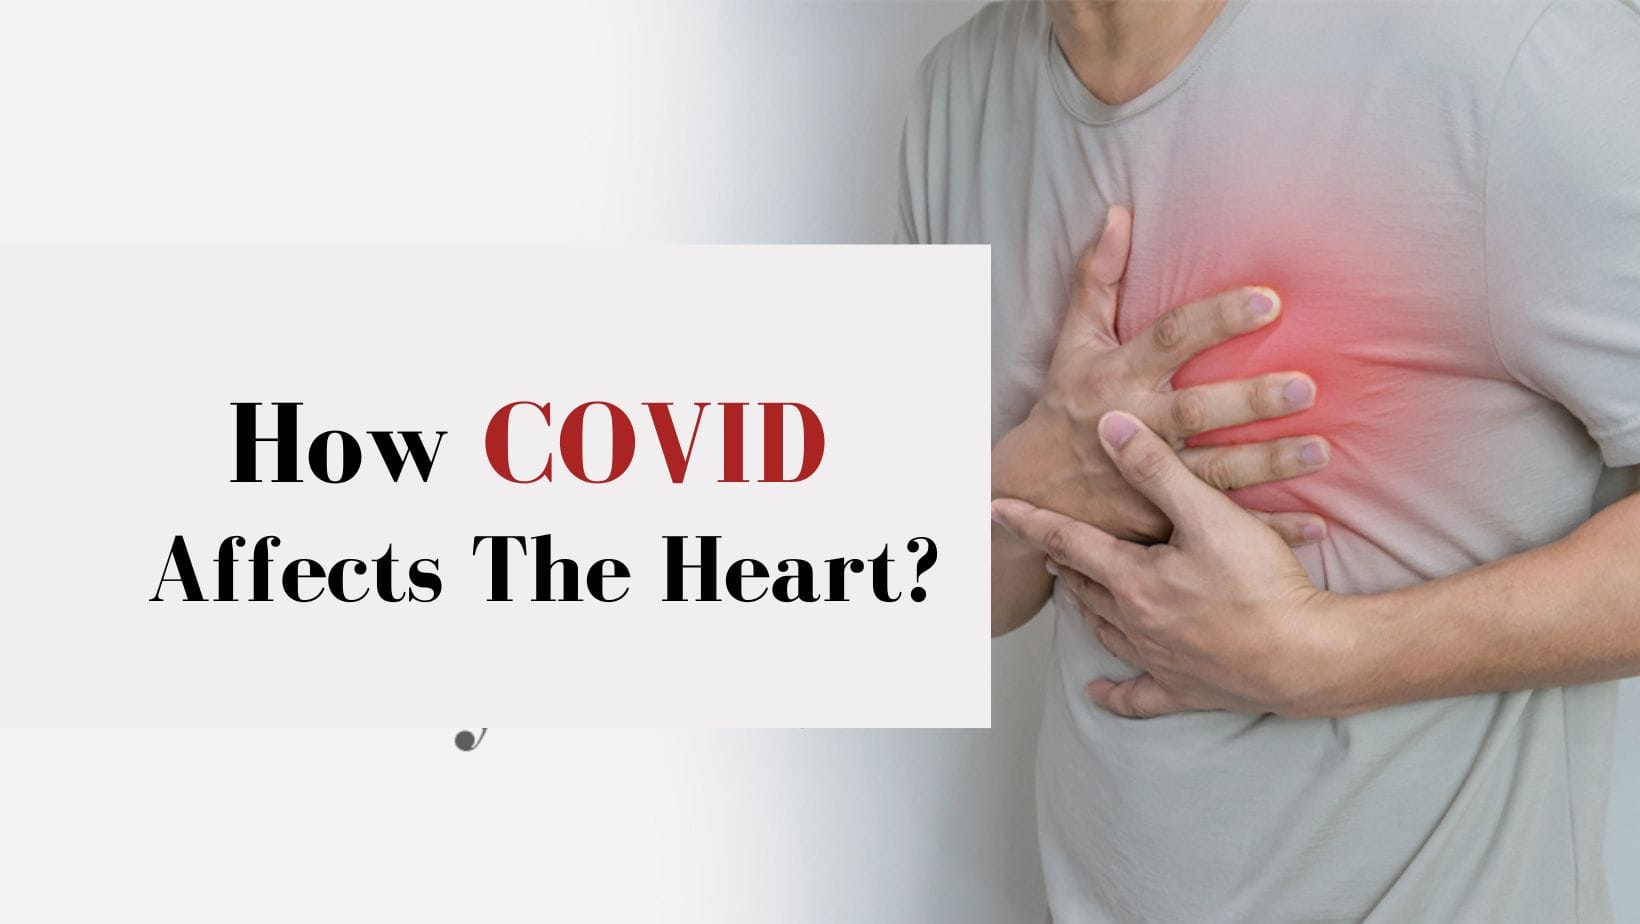 Revealed: This Is How COVID Virus Impacts The Heart